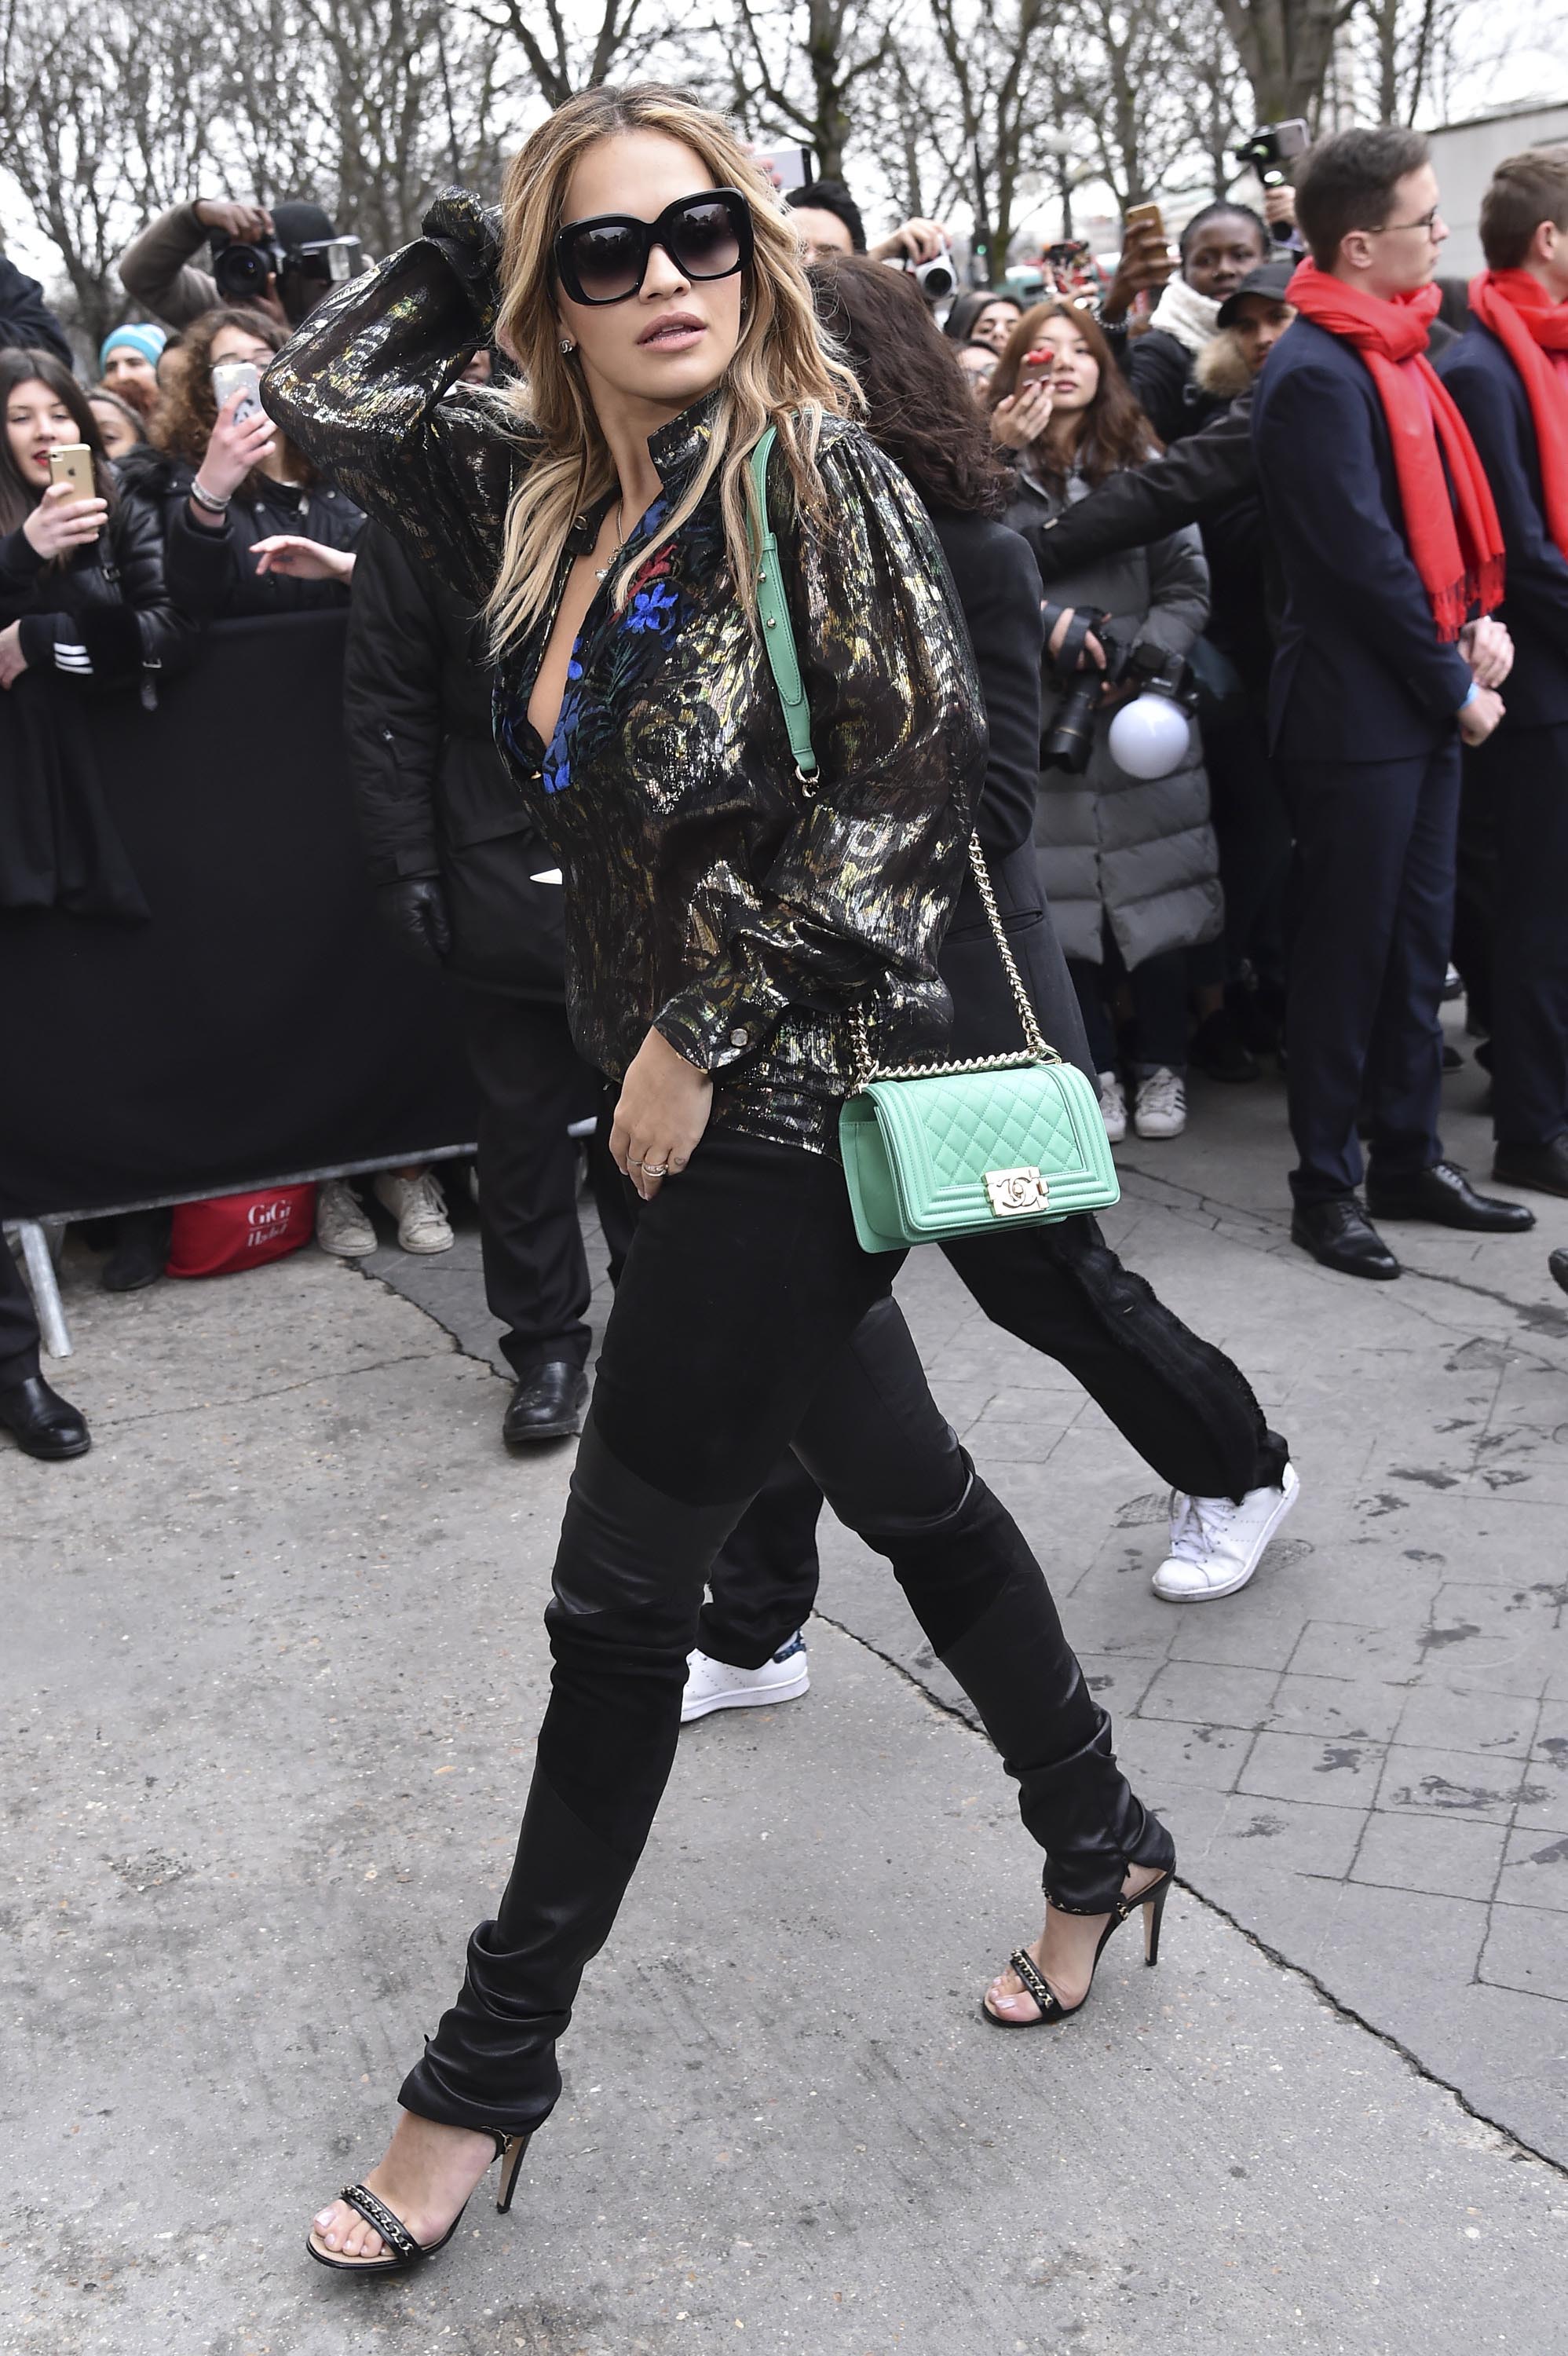 Rita Ora is seen arriving at Chanel fashion show